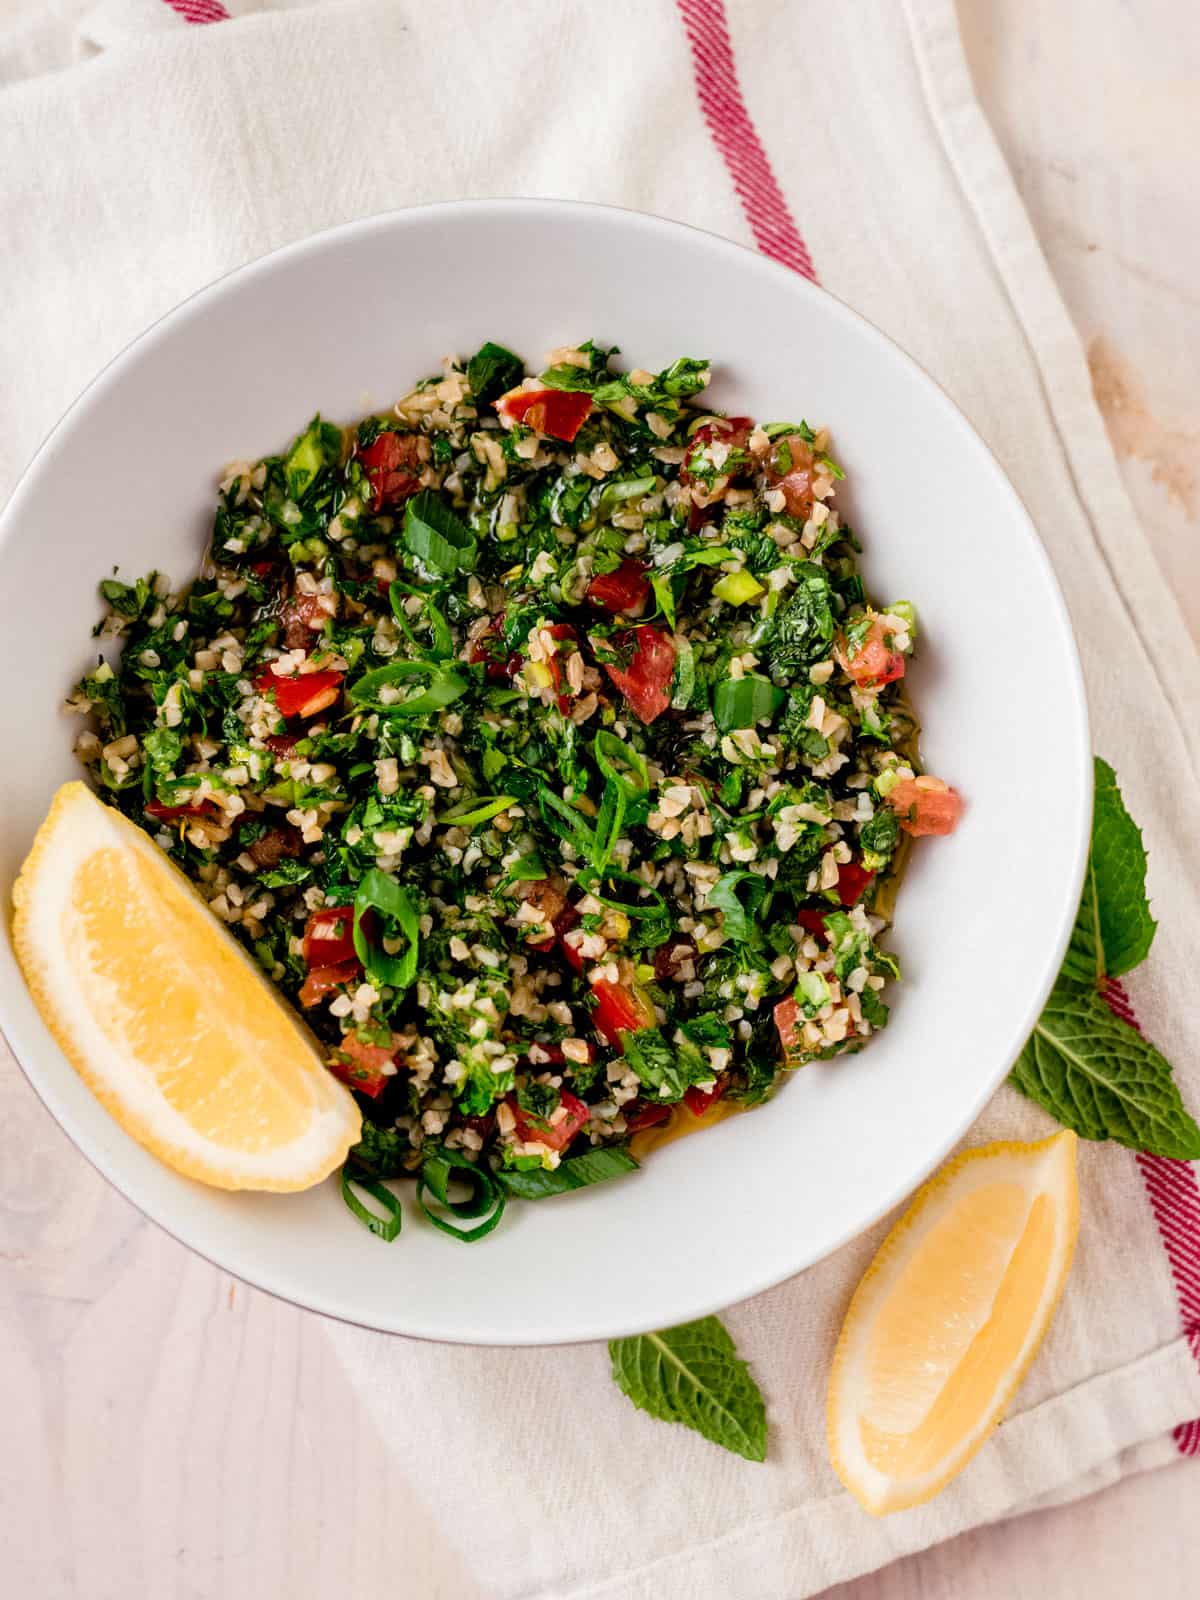 Lebanese style tabbouleh salad with fine bulgur and lots of fresh parsley, mint and green onions.